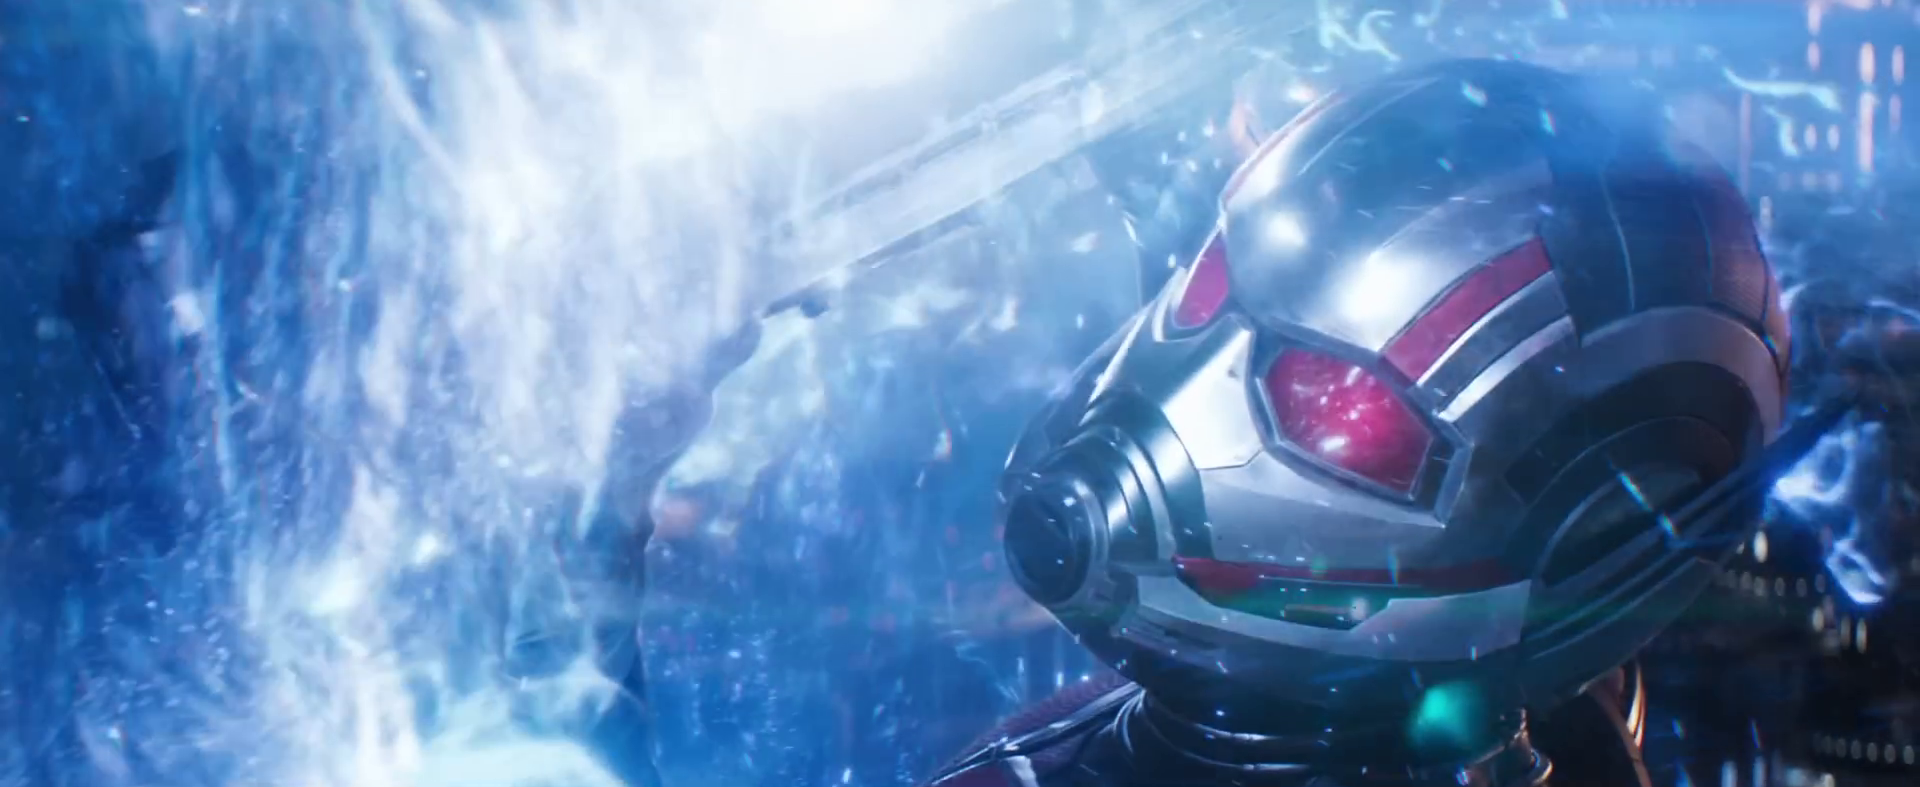 Quantumania': Ant-Man, Wasp adventure woos some, worries others